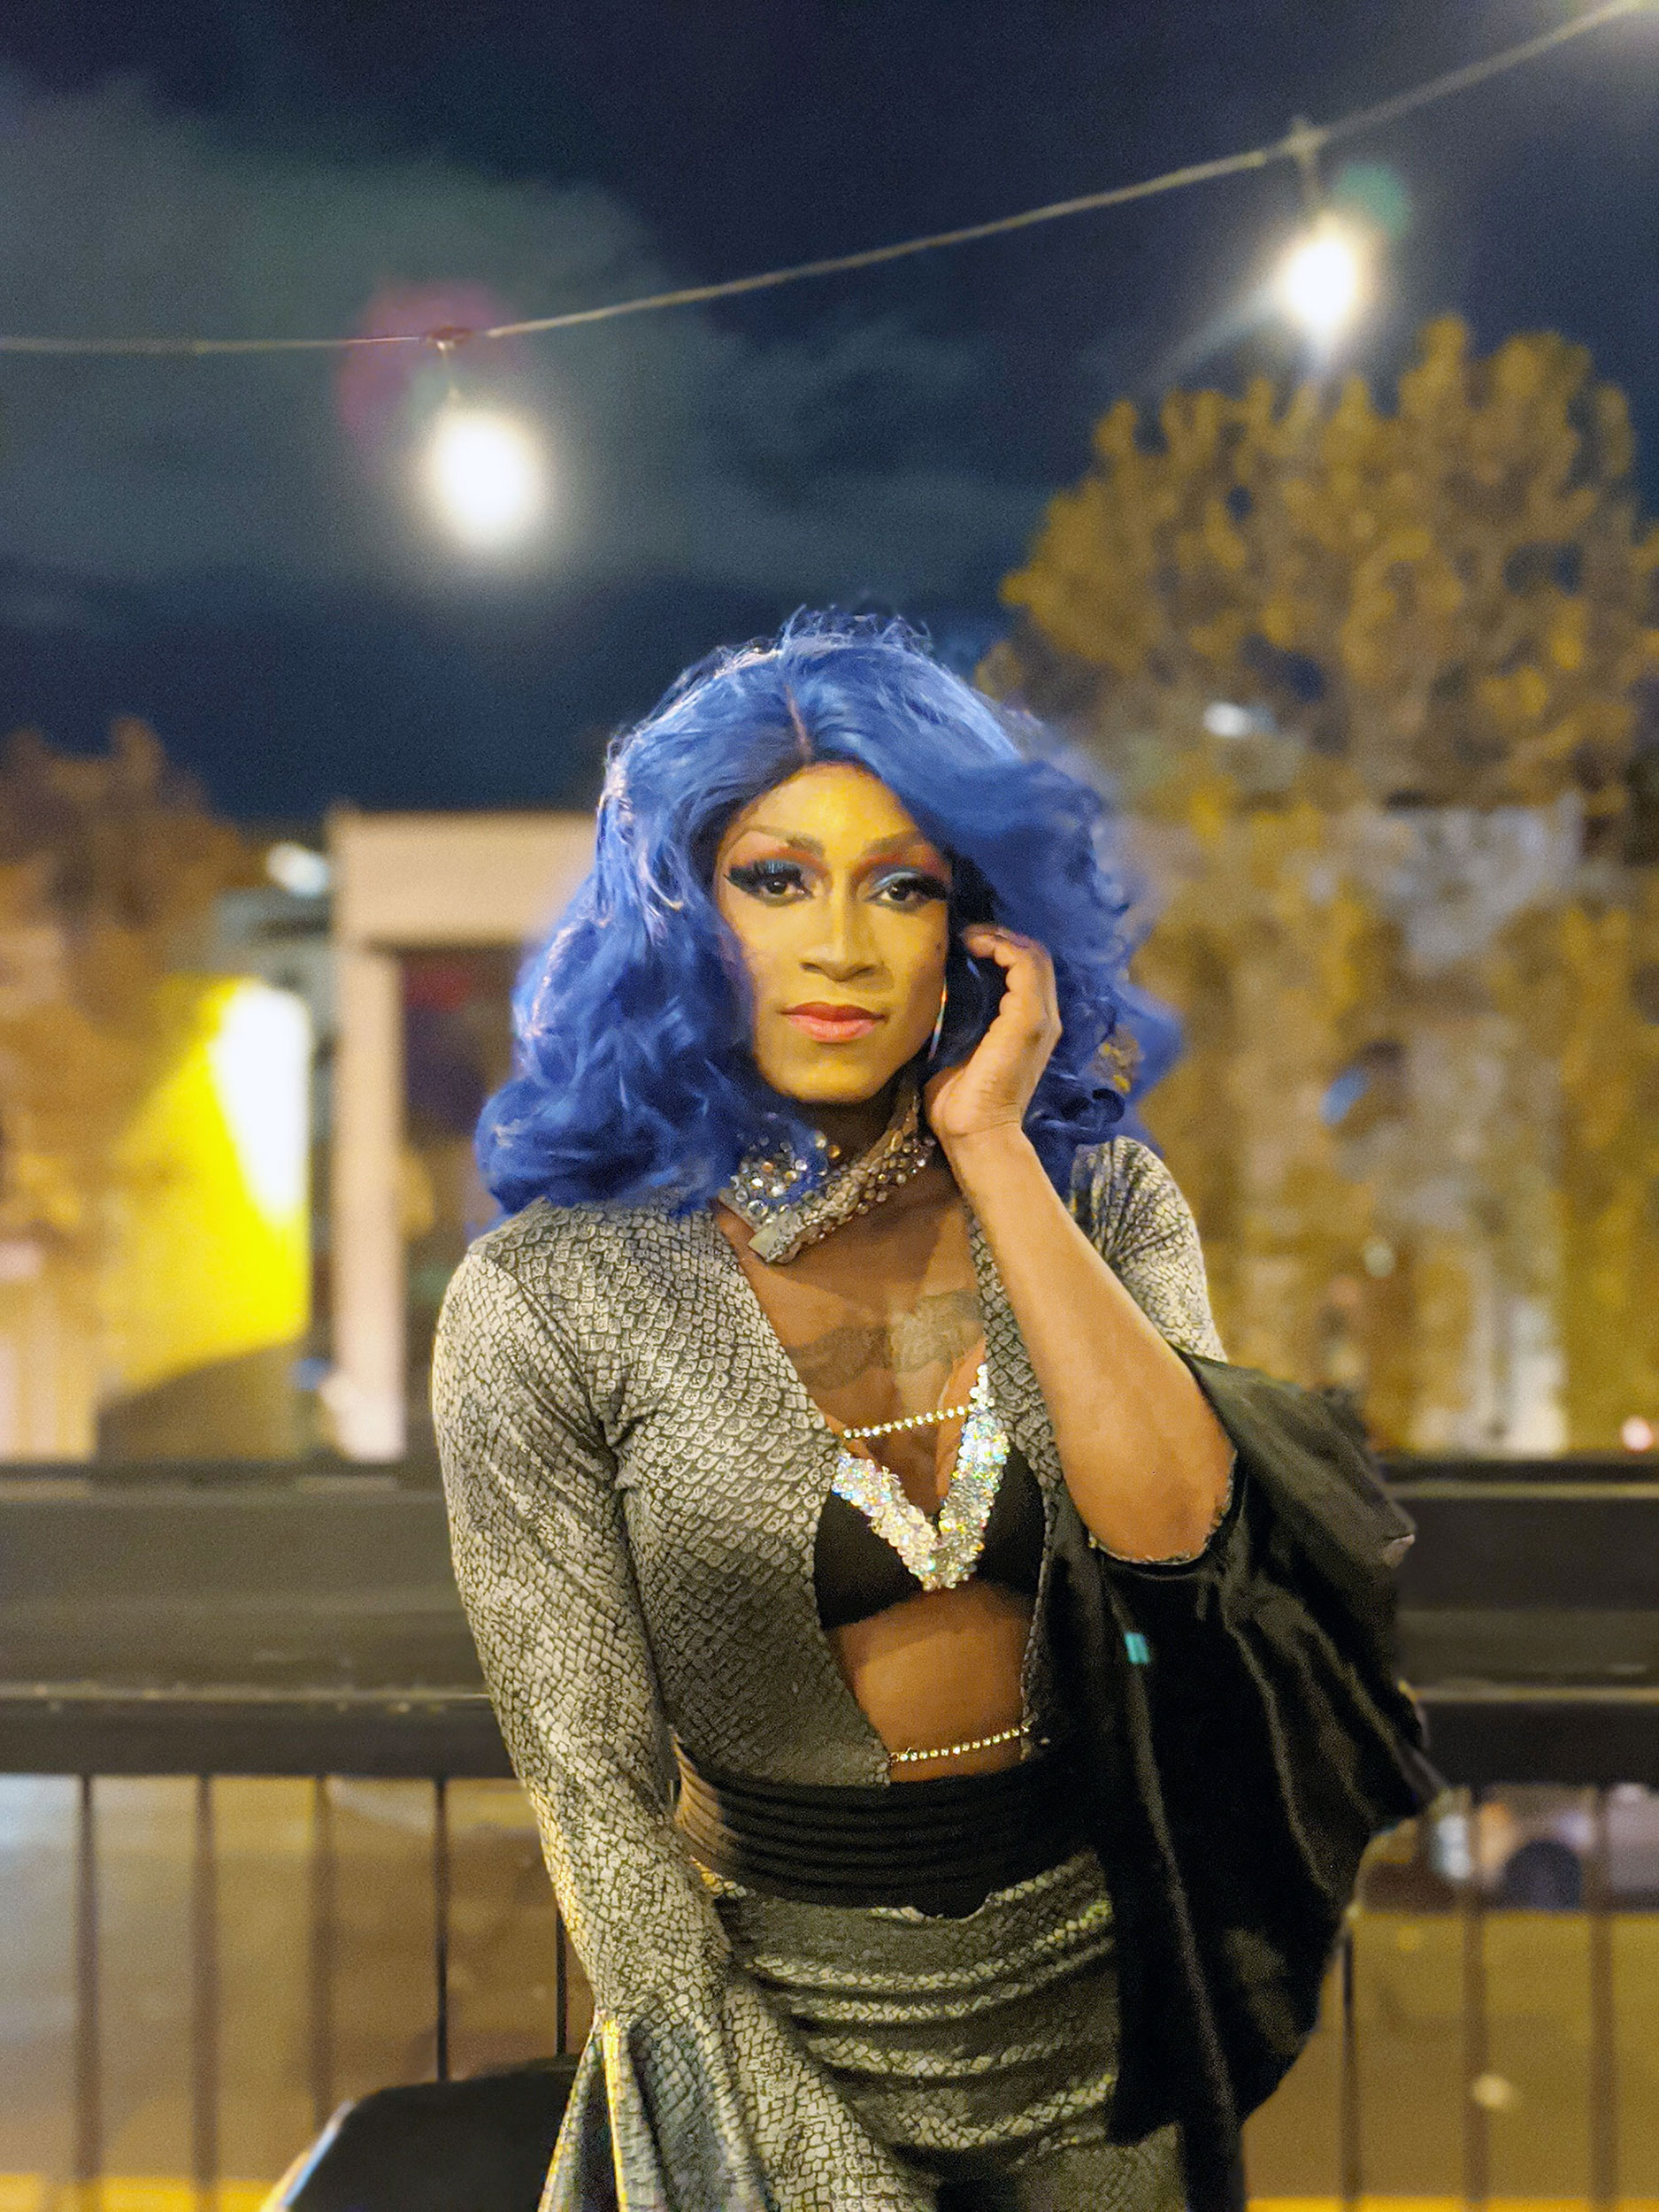 Drag queen Nubia Jackson posing at Nellie's Sports Bar.